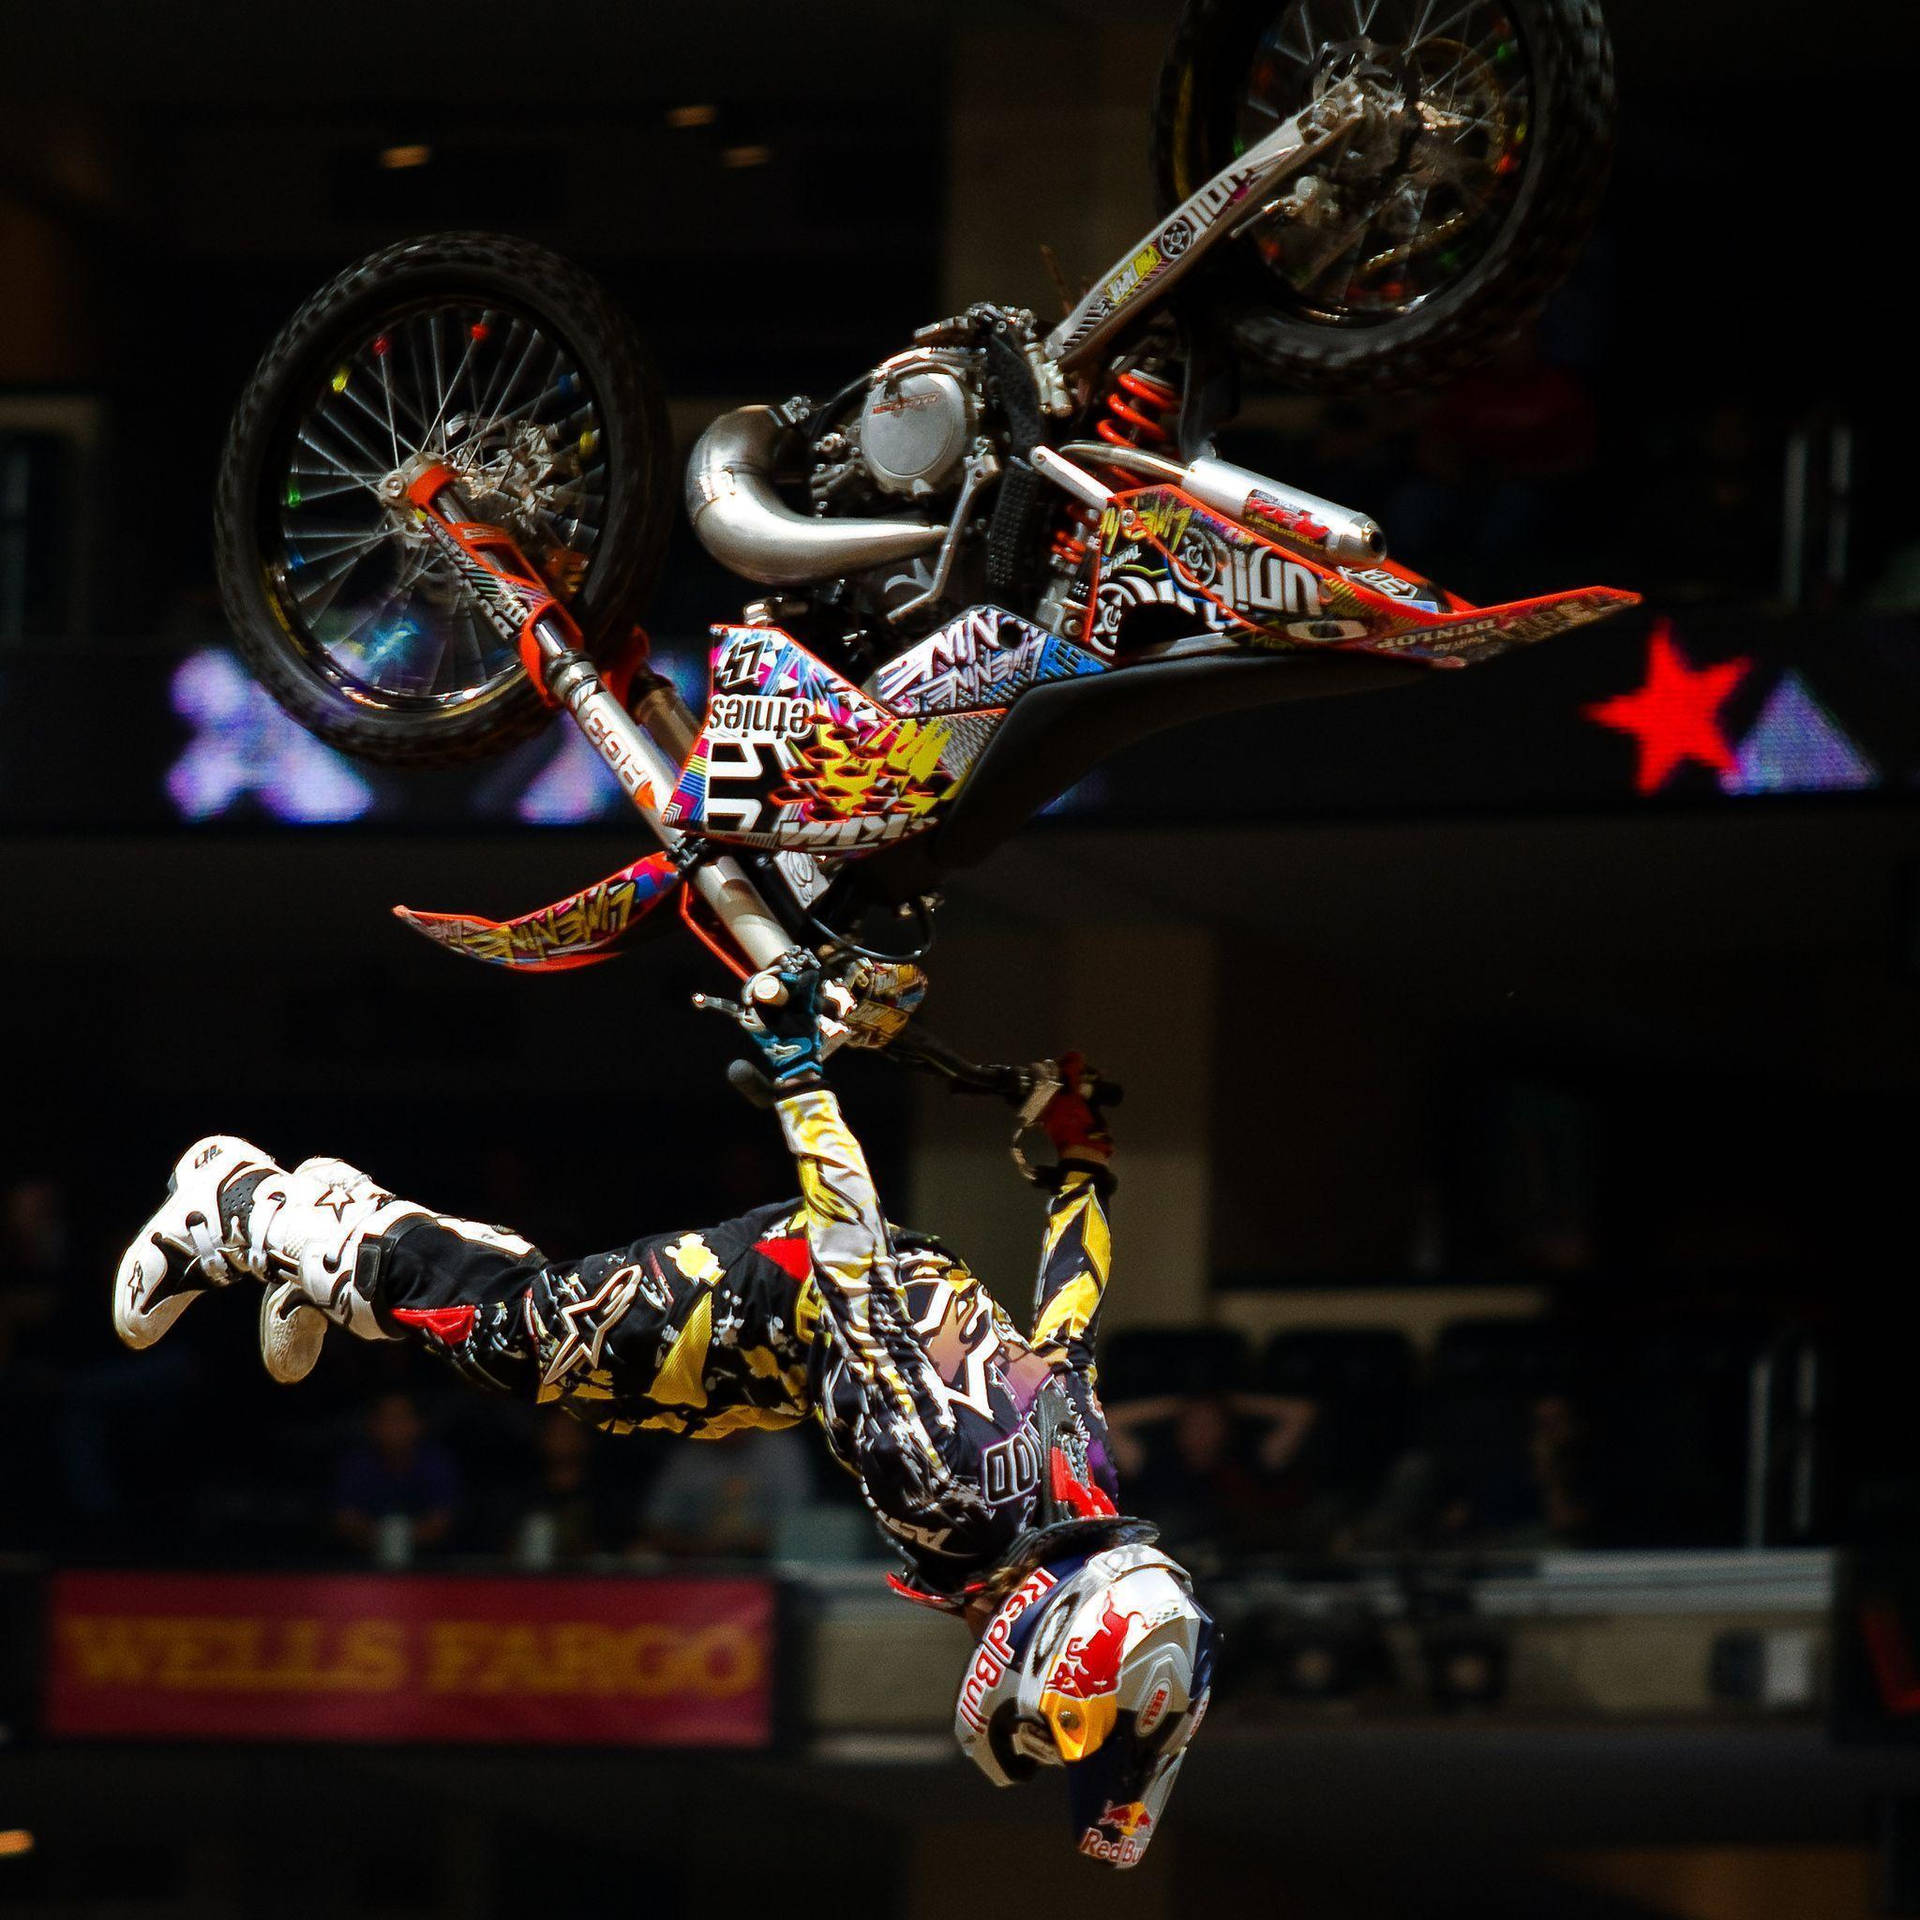 Fearless Motocross Rider Soaring In The Sky At X Games